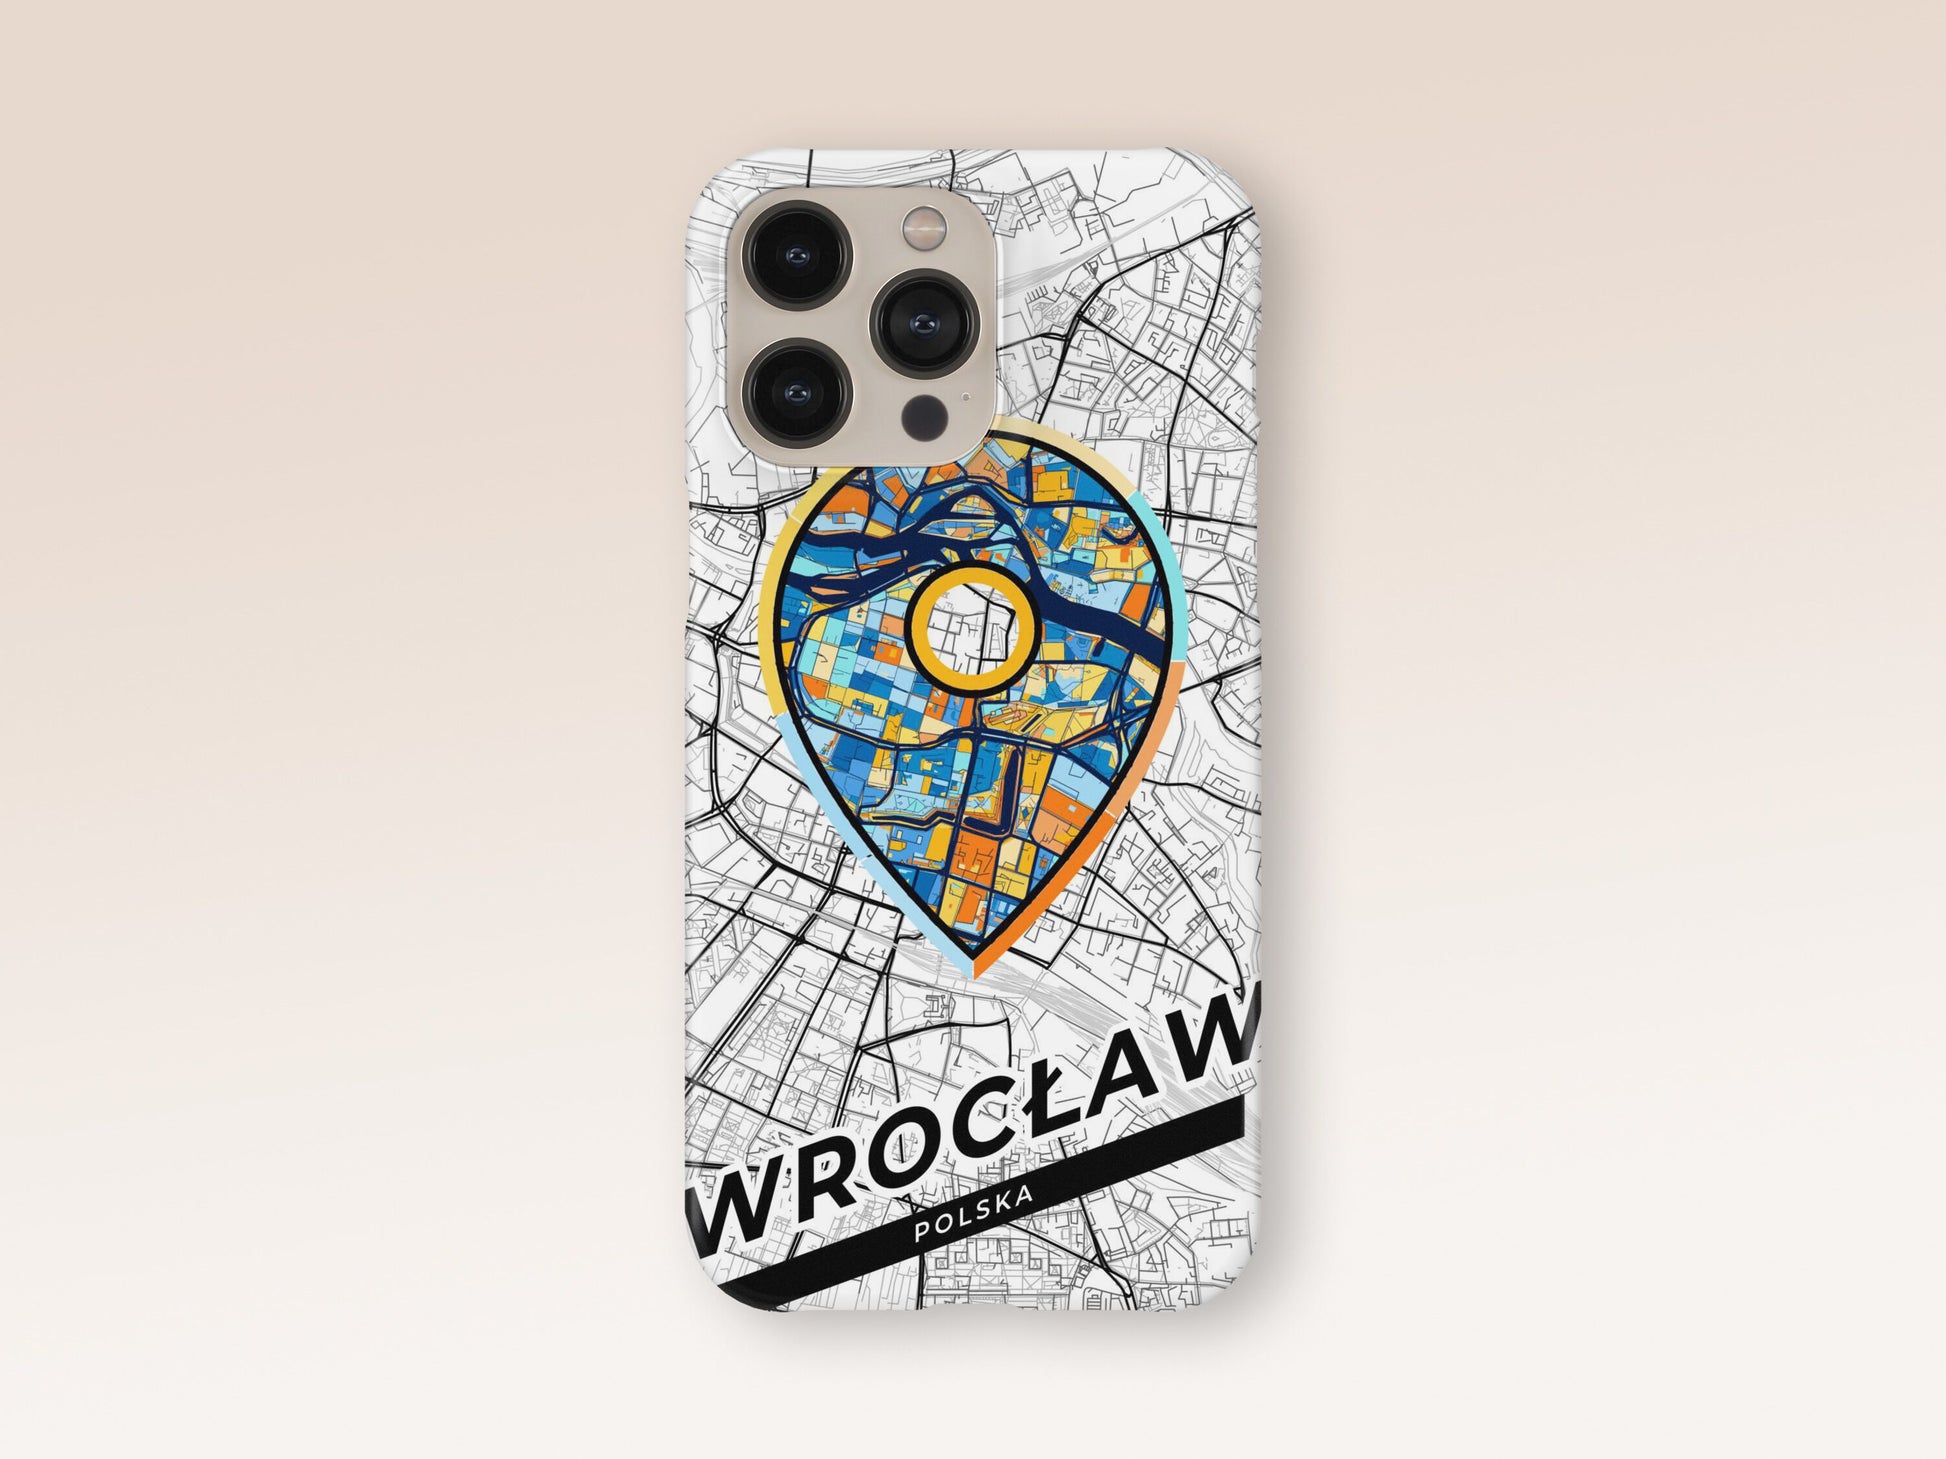 Wrocław Poland slim phone case with colorful icon 1